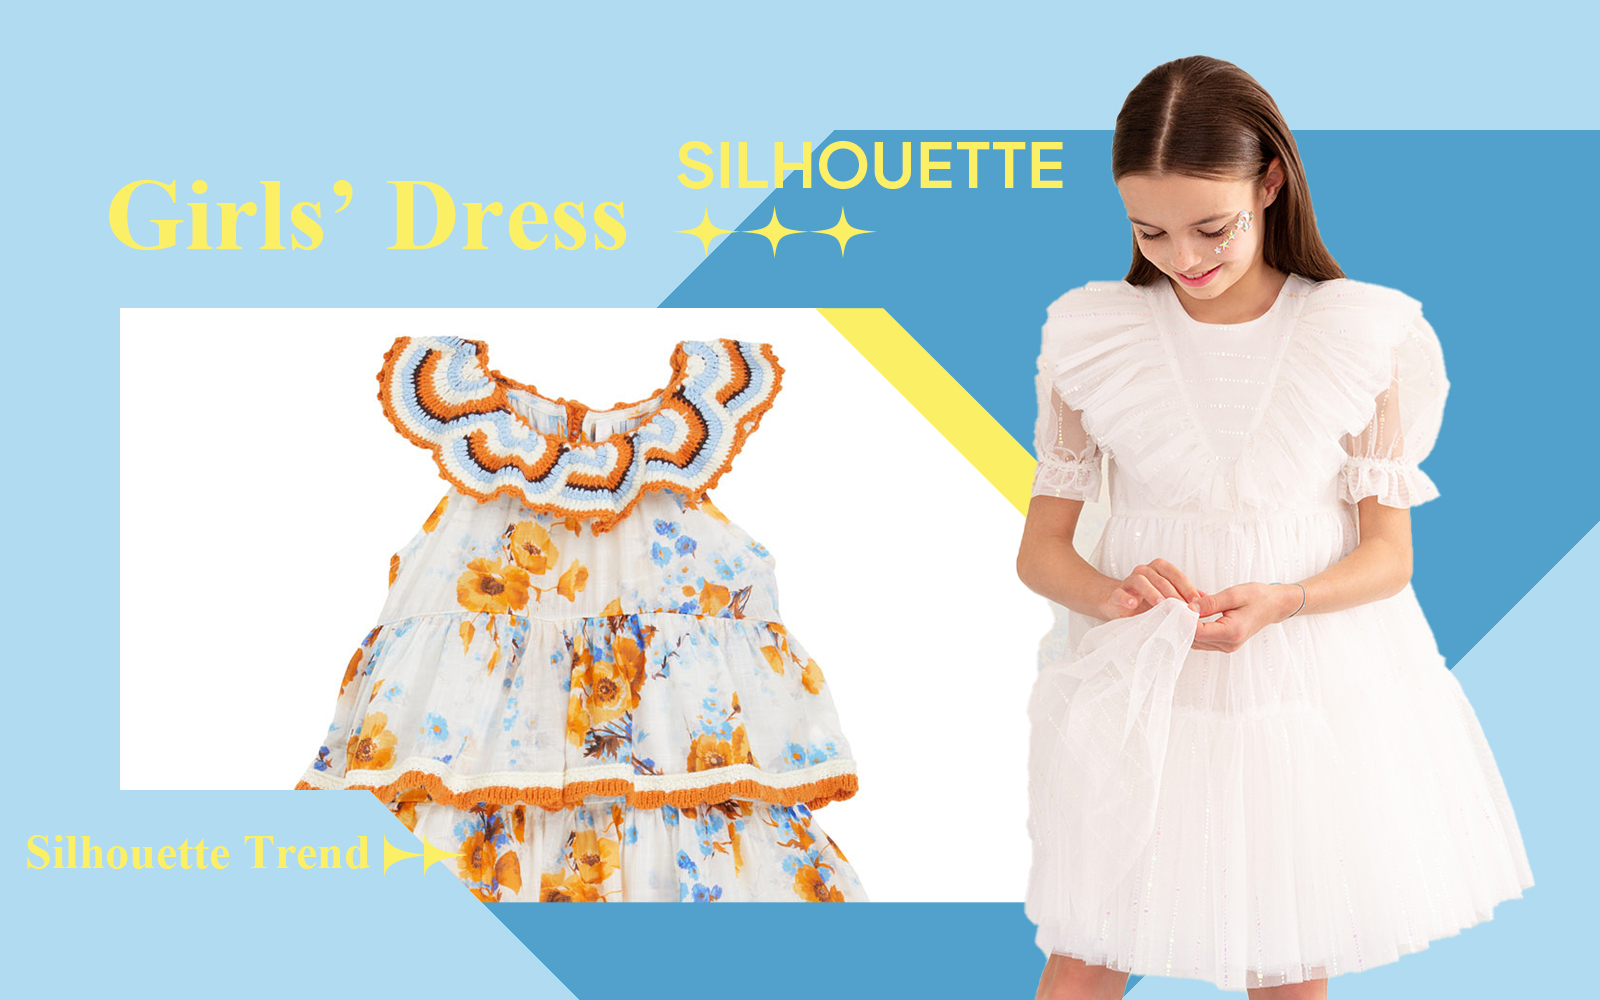 The Silhouette Trend for Girls' Dress